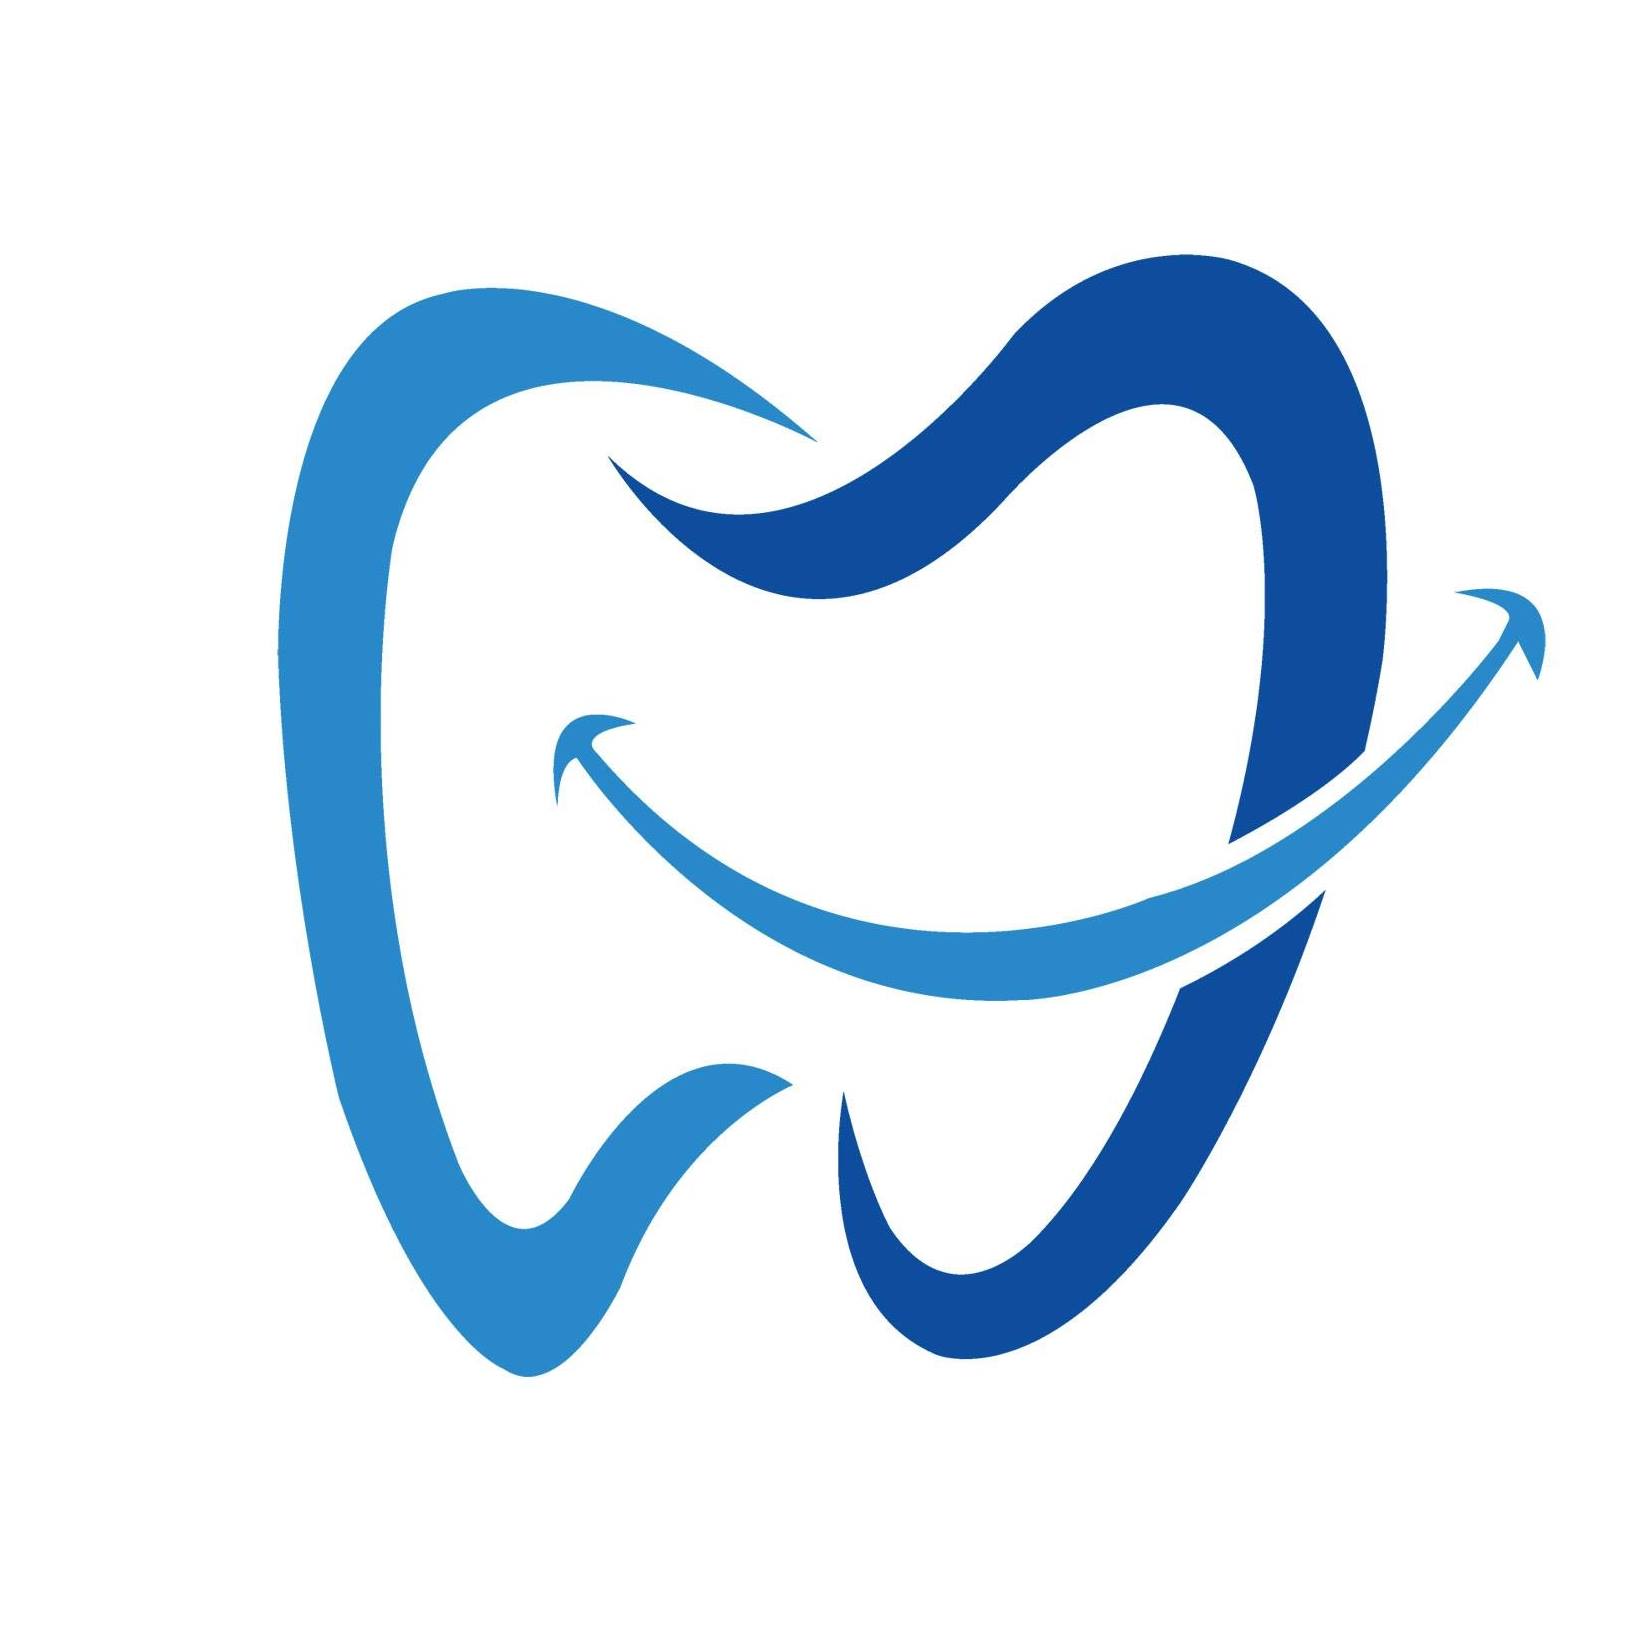 Company logo of First Choice Dental Services